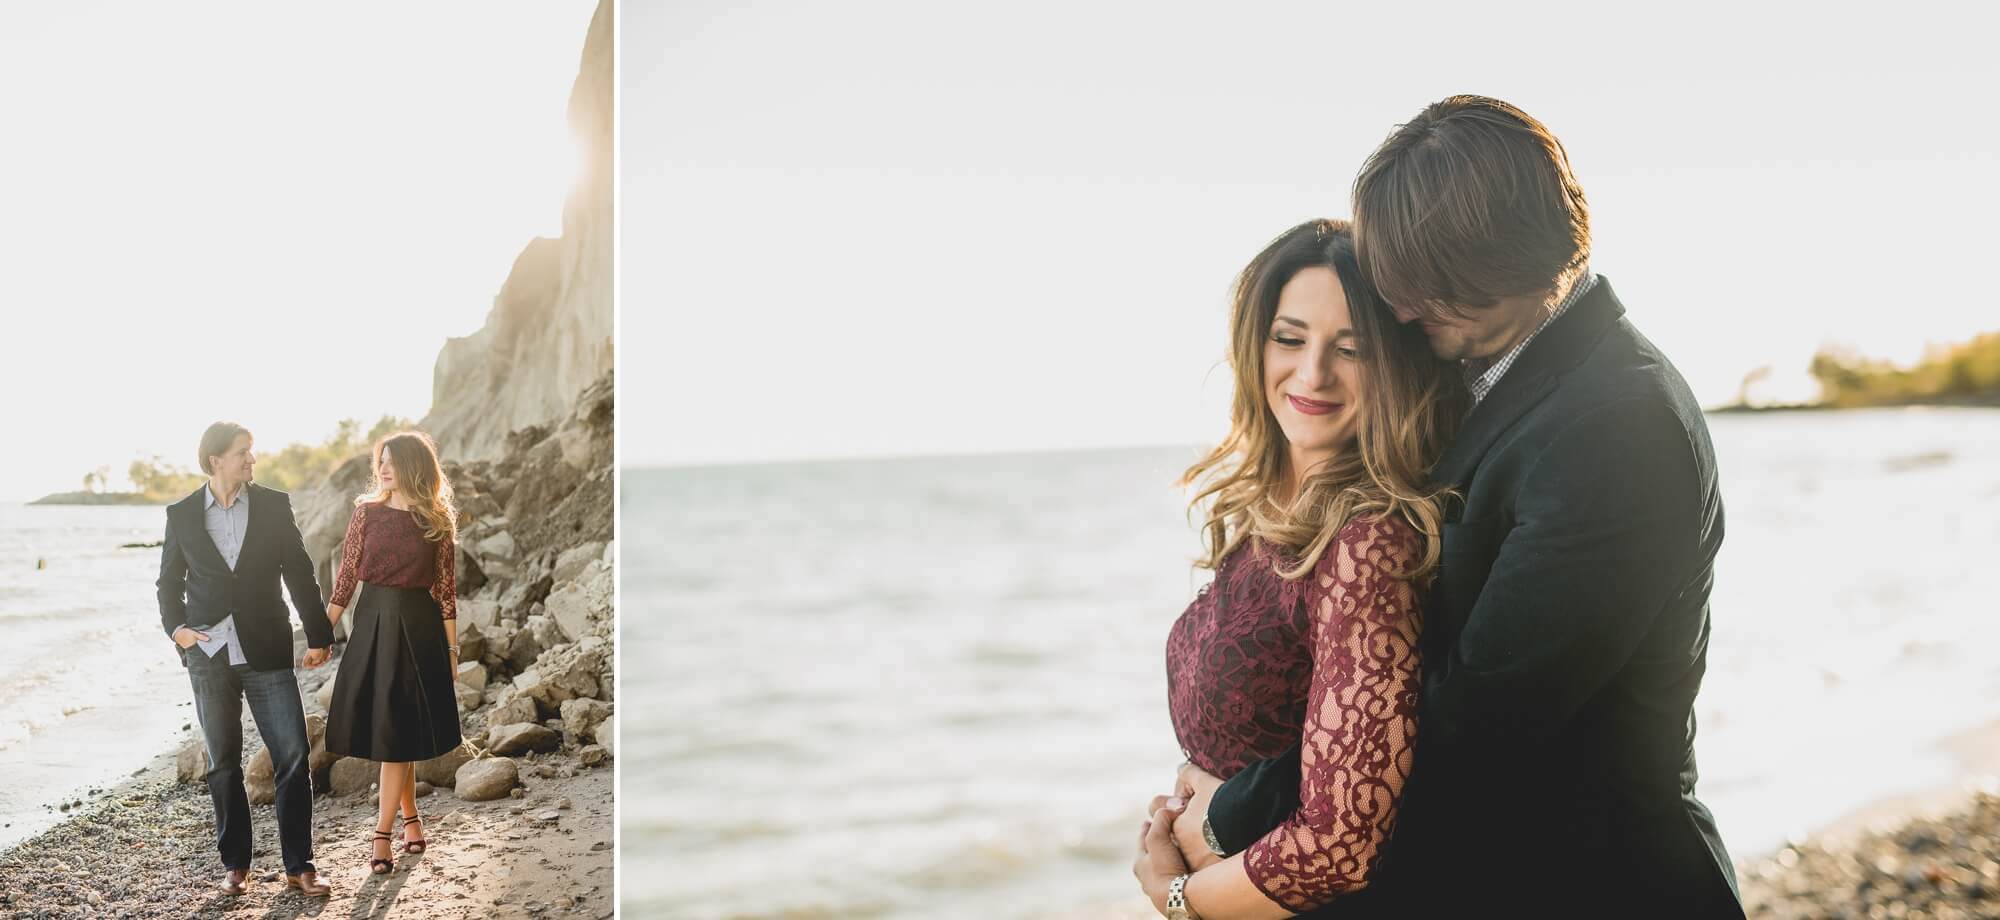 The bride-to-be wrapped in her fiance's arms during their engagement shoot at Scarborough Bluffs in Toronto